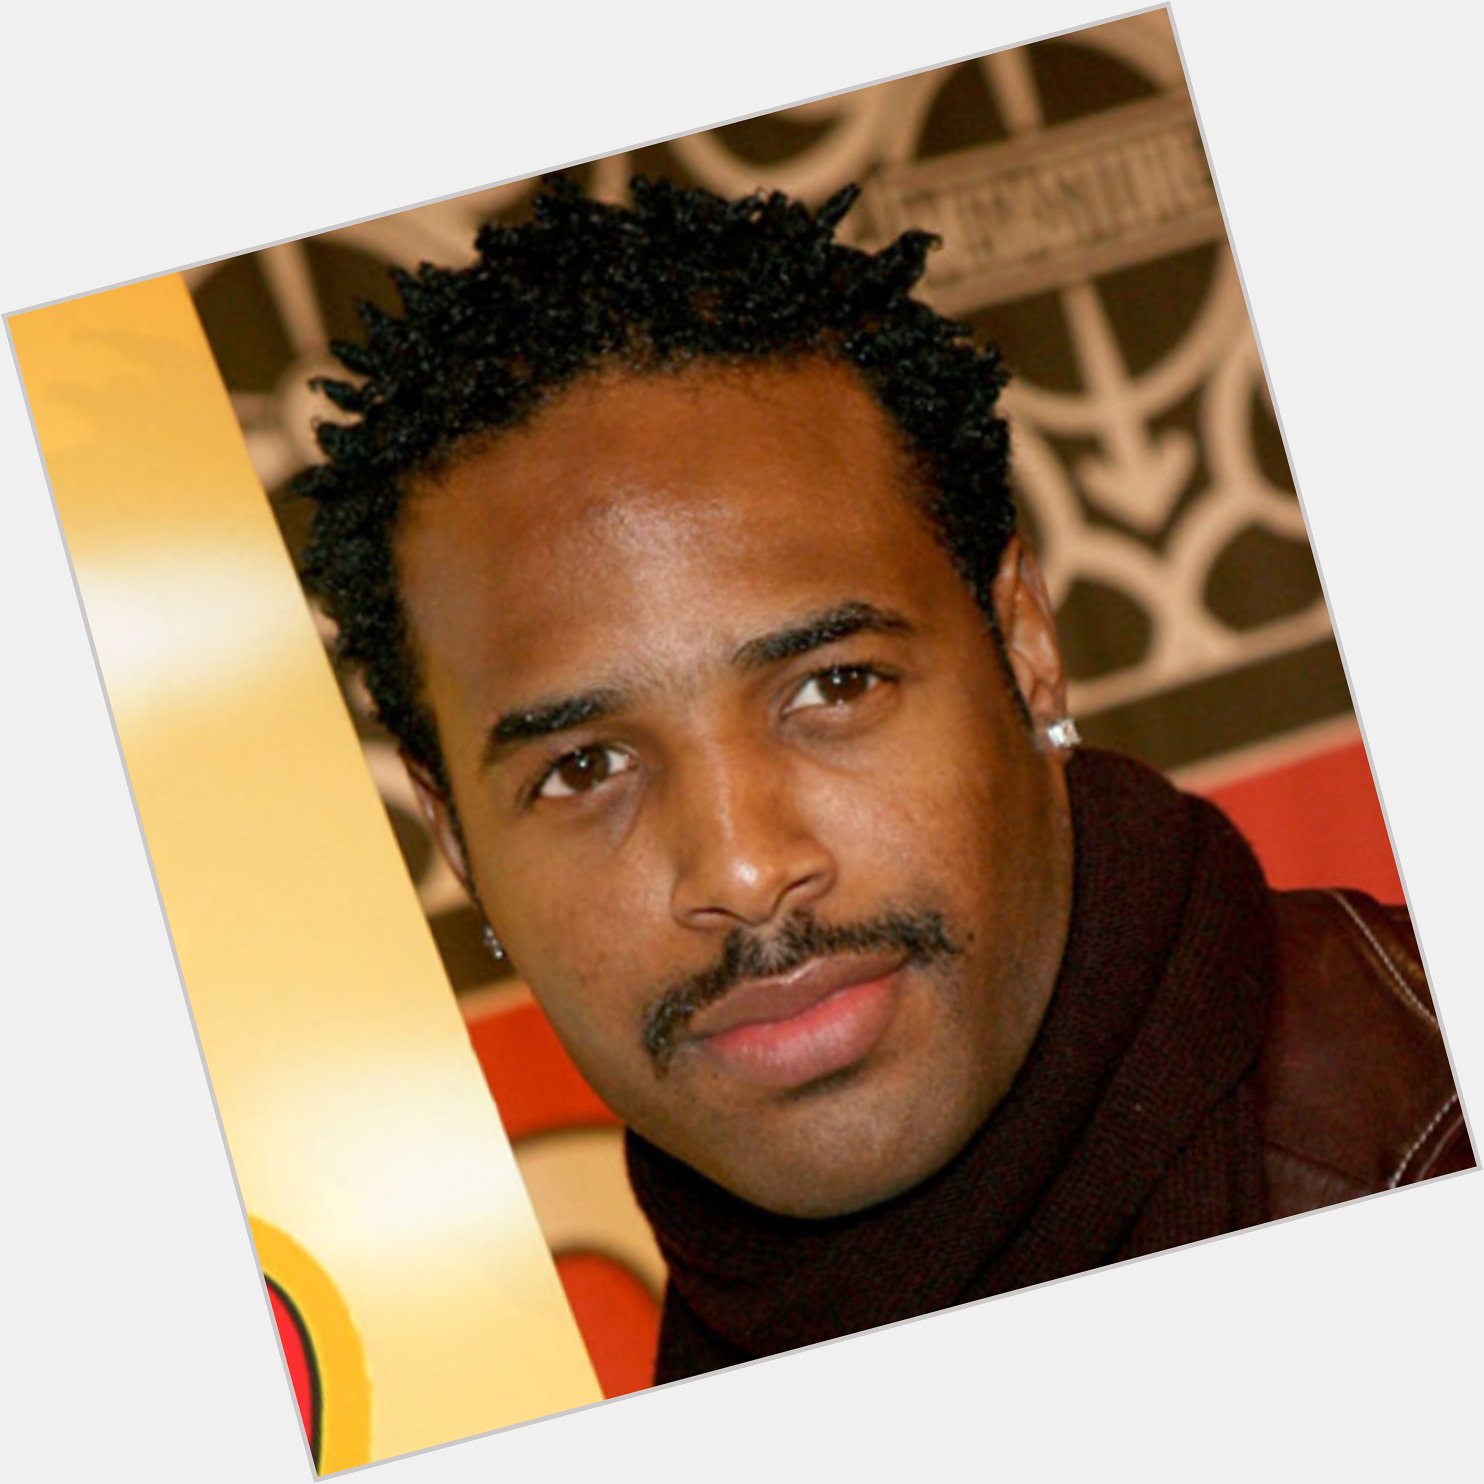 A happy birthday from Toasting The Town to Shawn Wayans! 